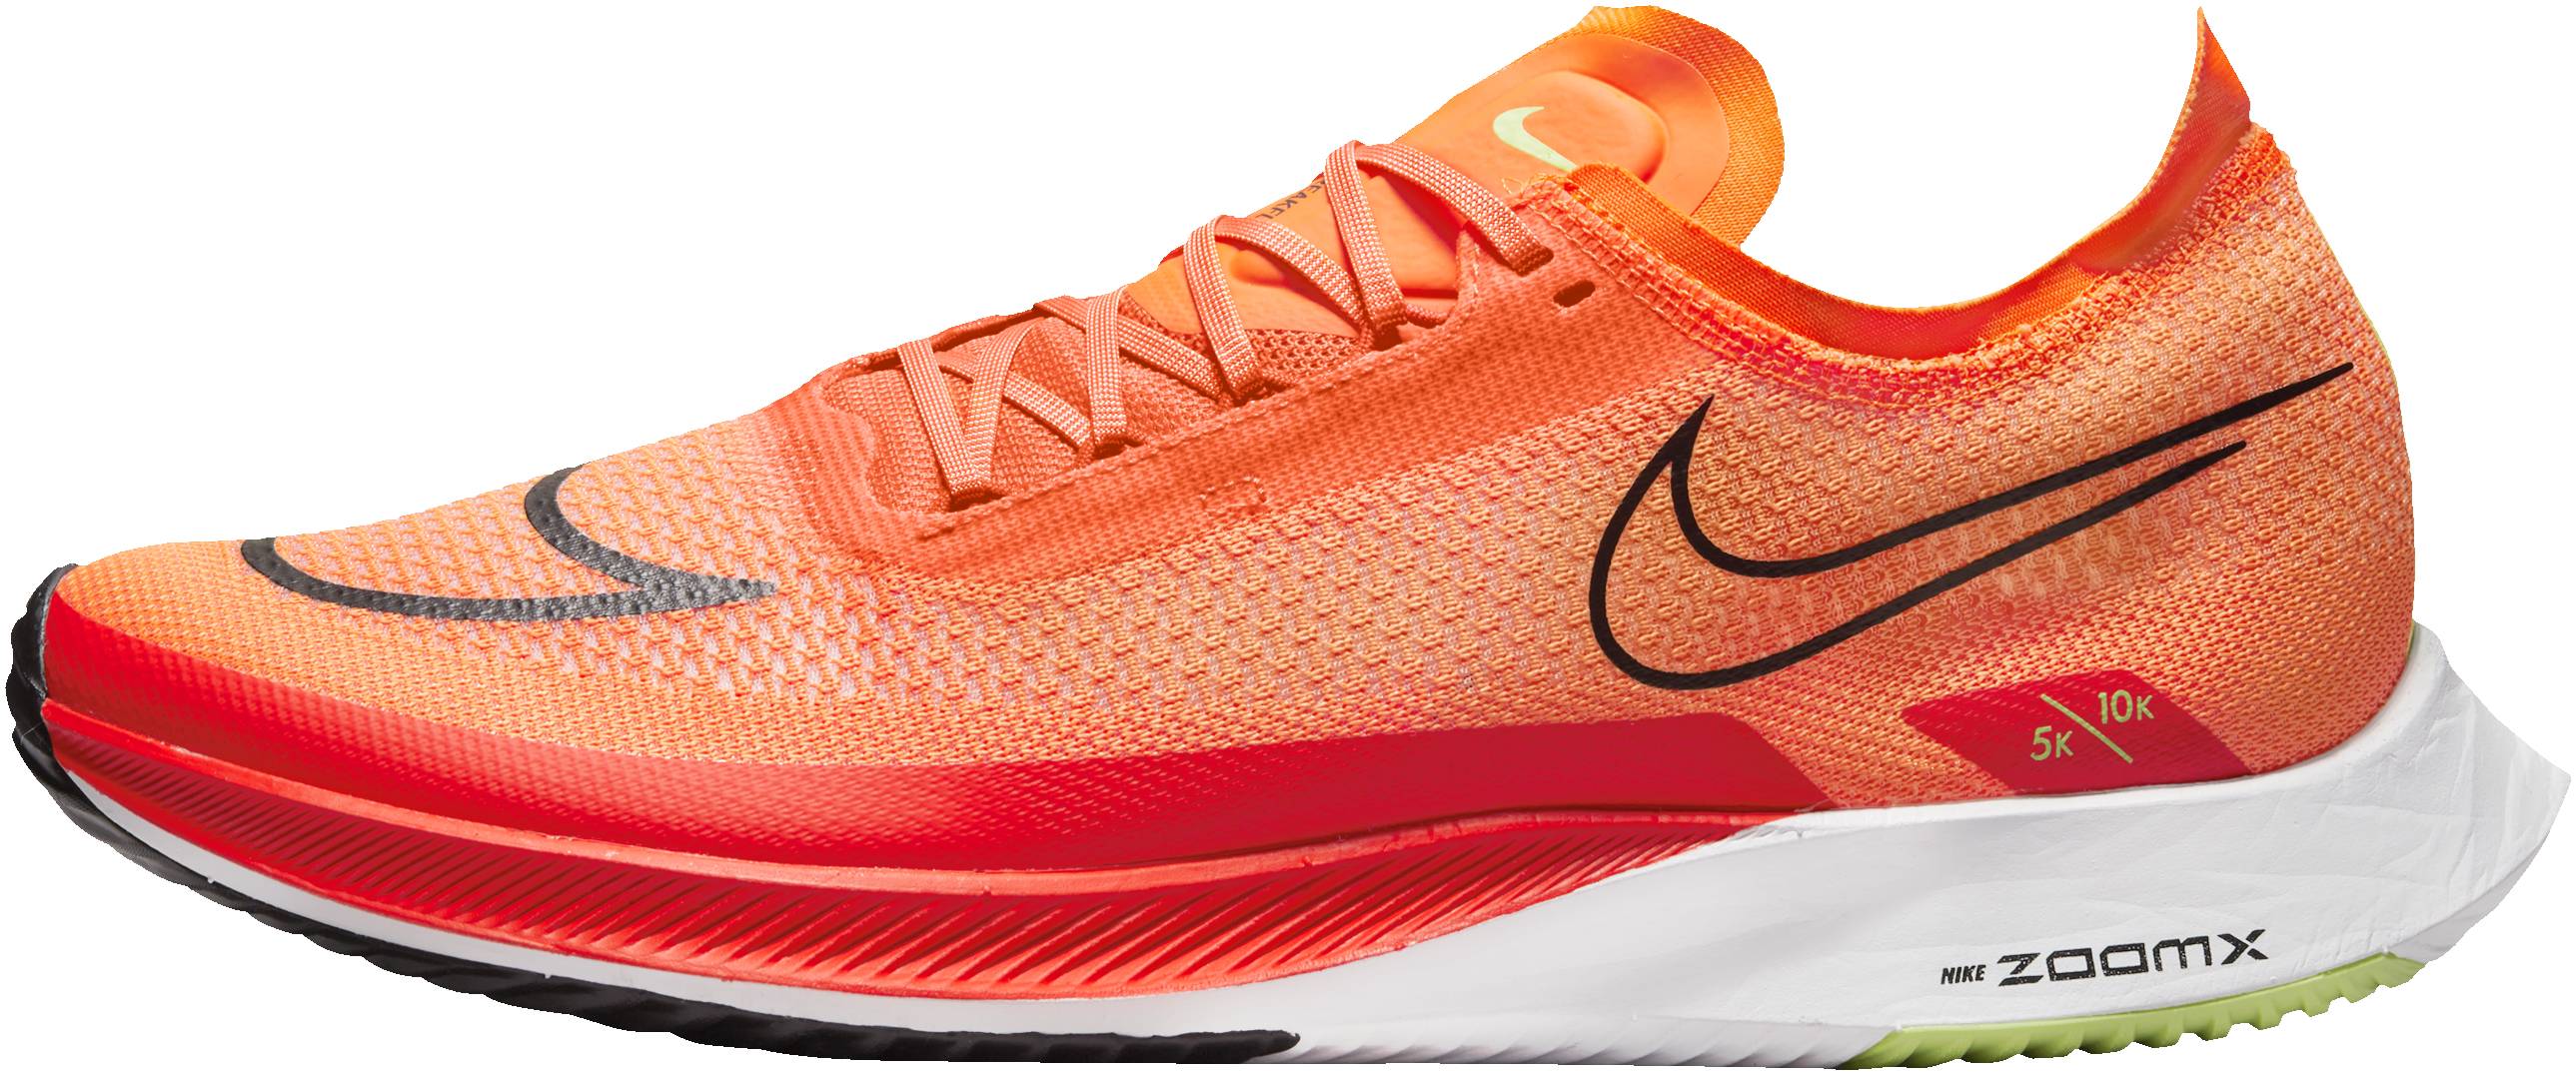 Nike ZoomX Streakfly Review 2022, Facts, Deals ($96) | RunRepeat